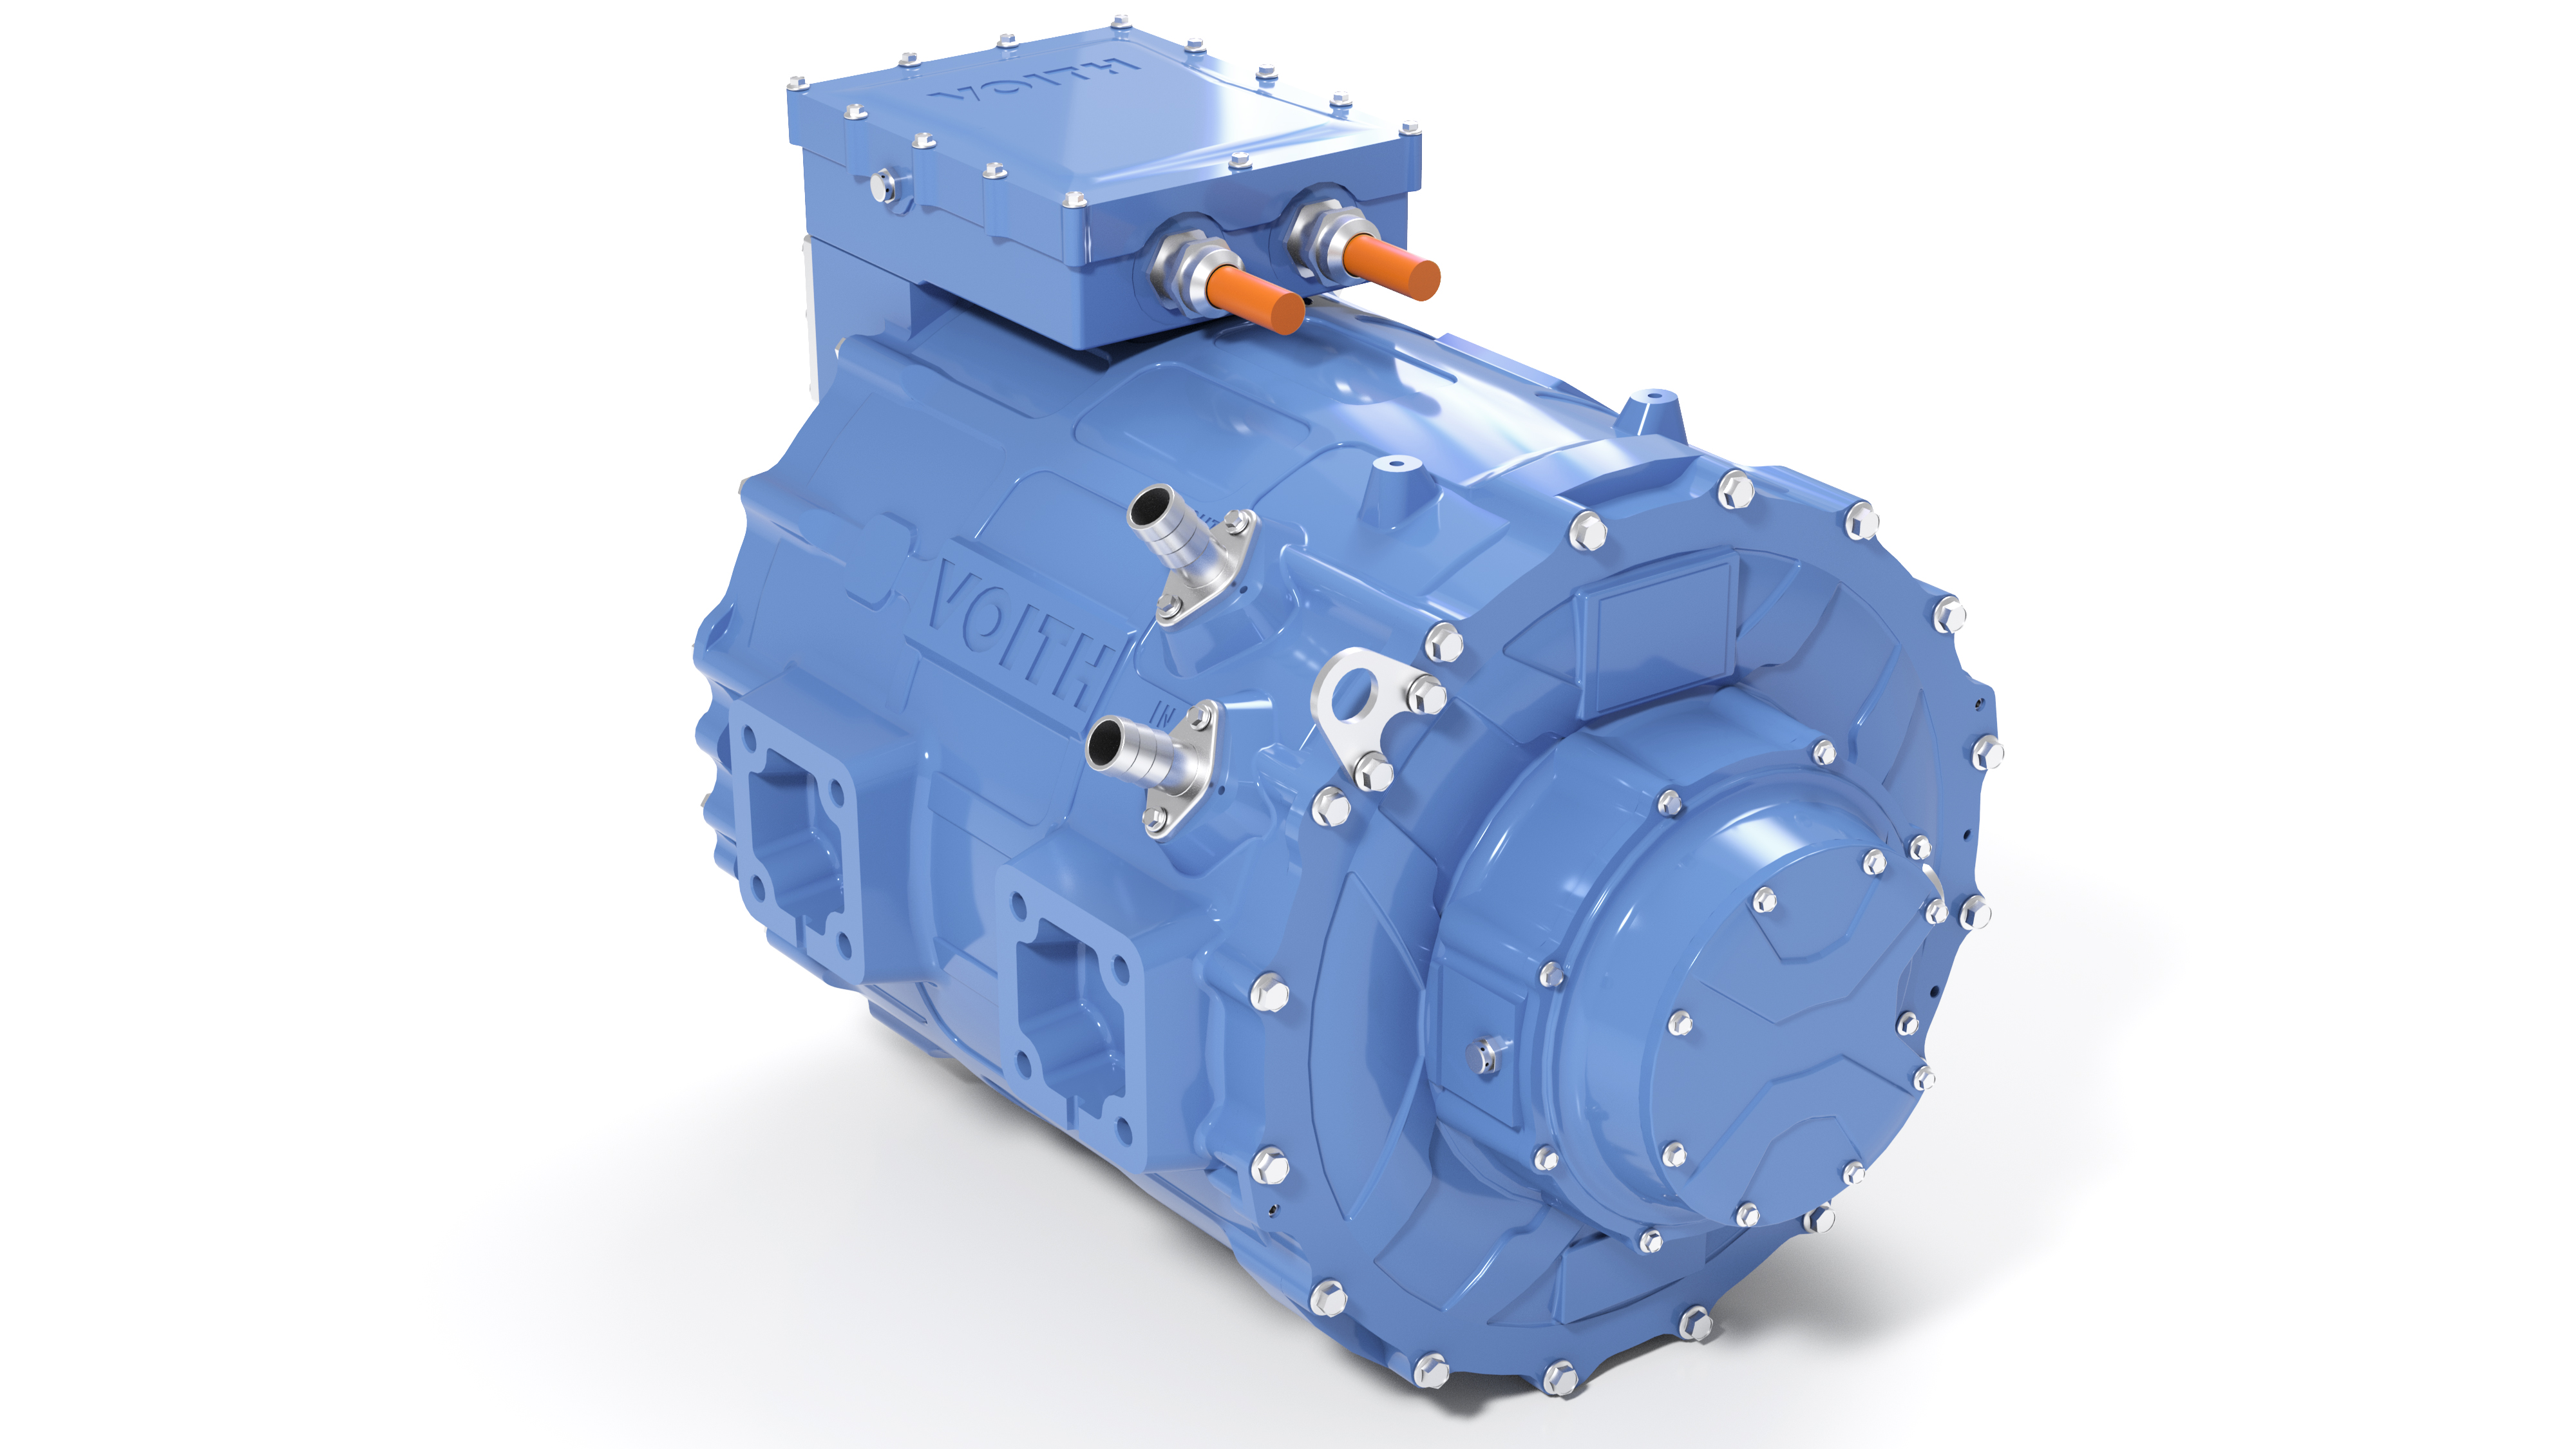 HD motor of the Voith Electrical Drive System (VEDS) with 310 kW continuous power and 410 kW peak power.